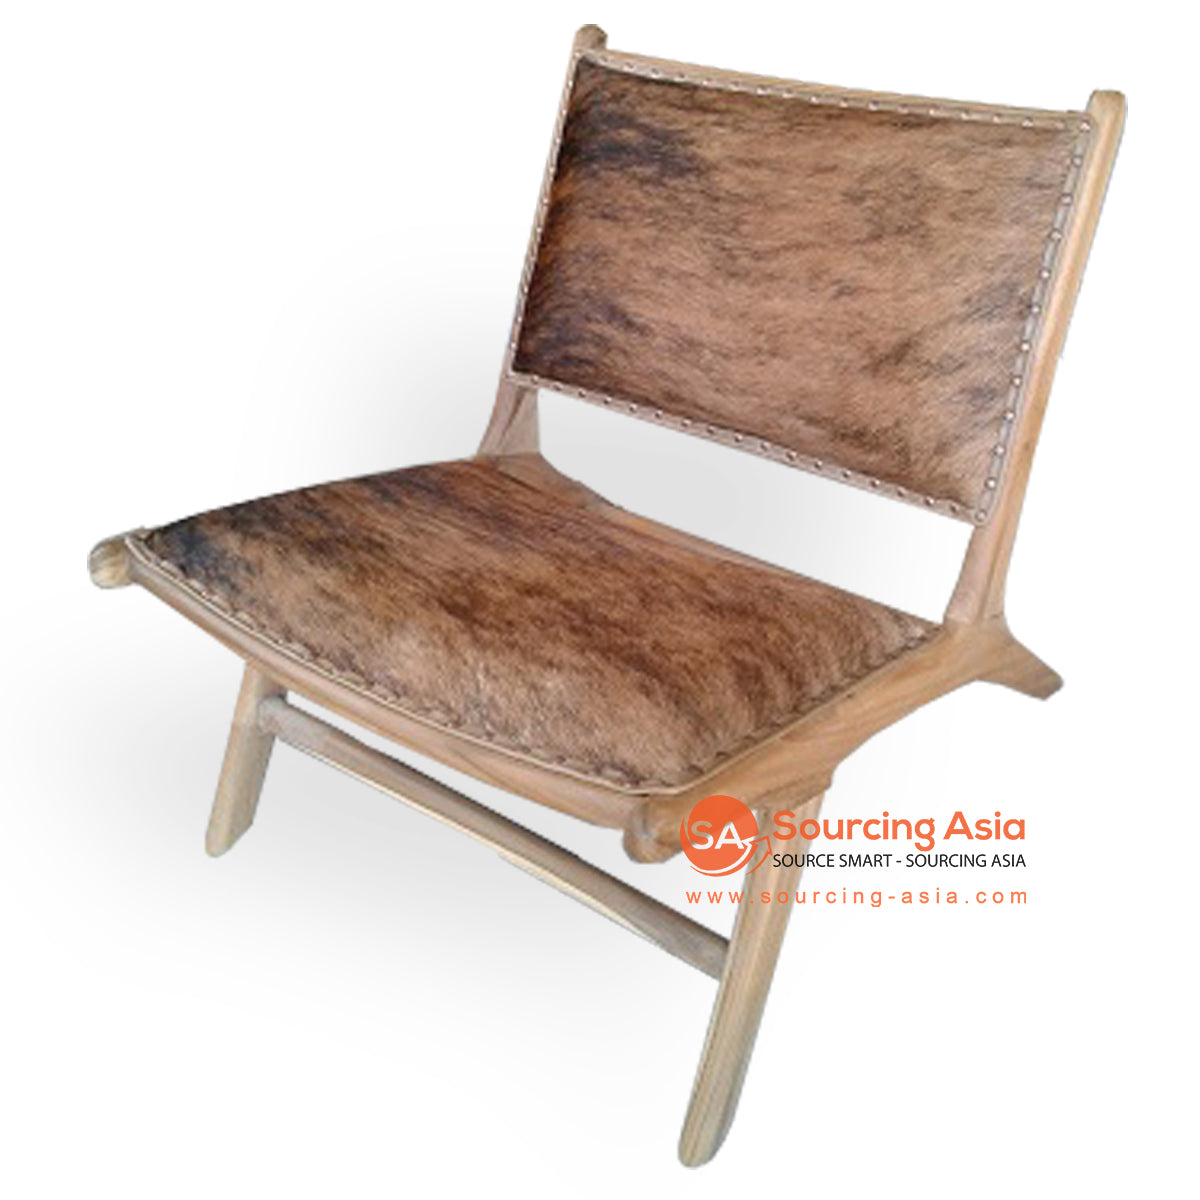 KUSJ002-CH BROWN COWHIDE LEATHER AND NATURAL TEAK WOOD MARLBORO LAZY CHAIR